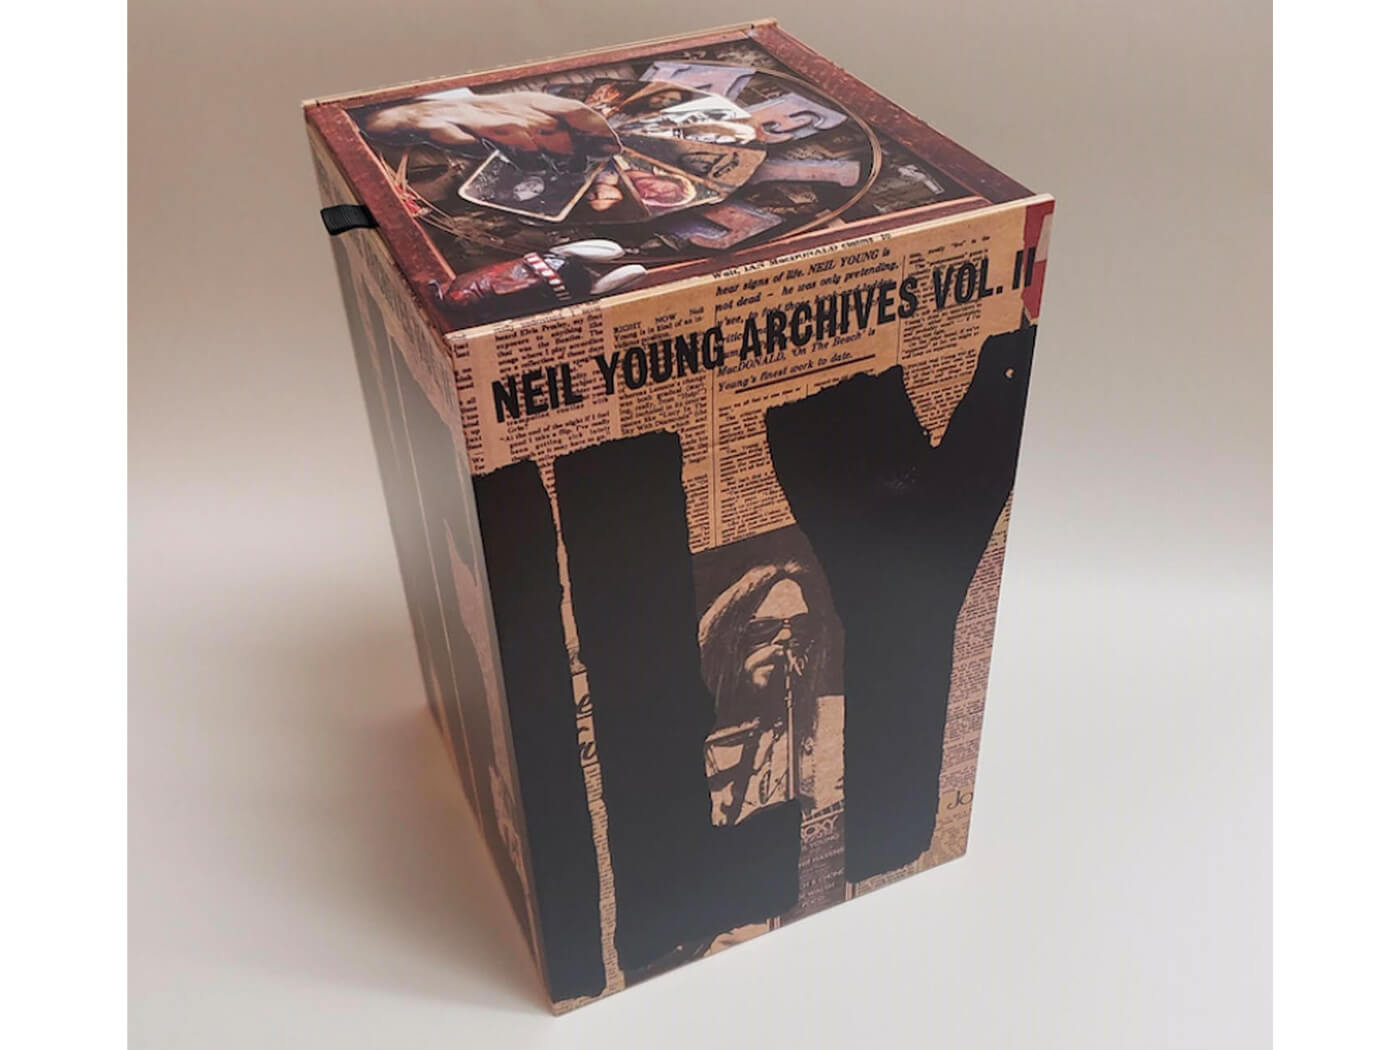 Neil Young Archives Vol II